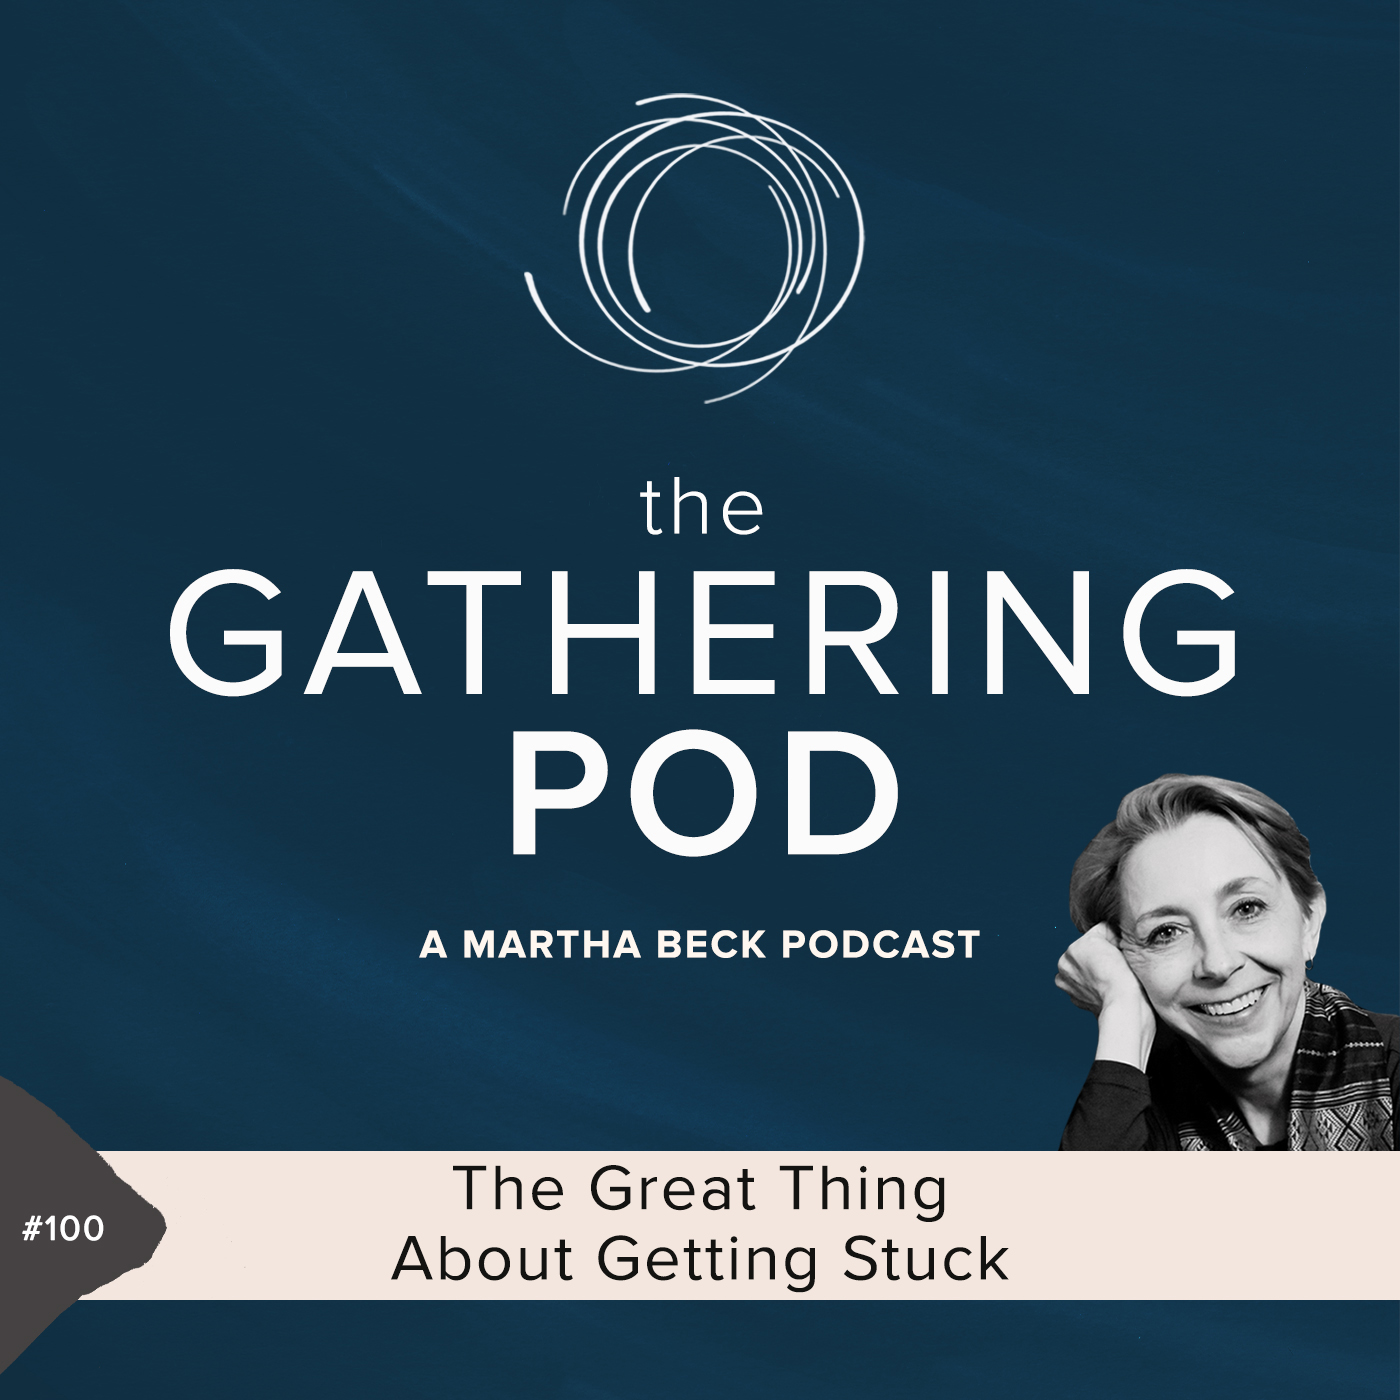 Image for The Gathering Pod A Martha Beck Podcast Episode #98 The Great Thing About Getting Stuck